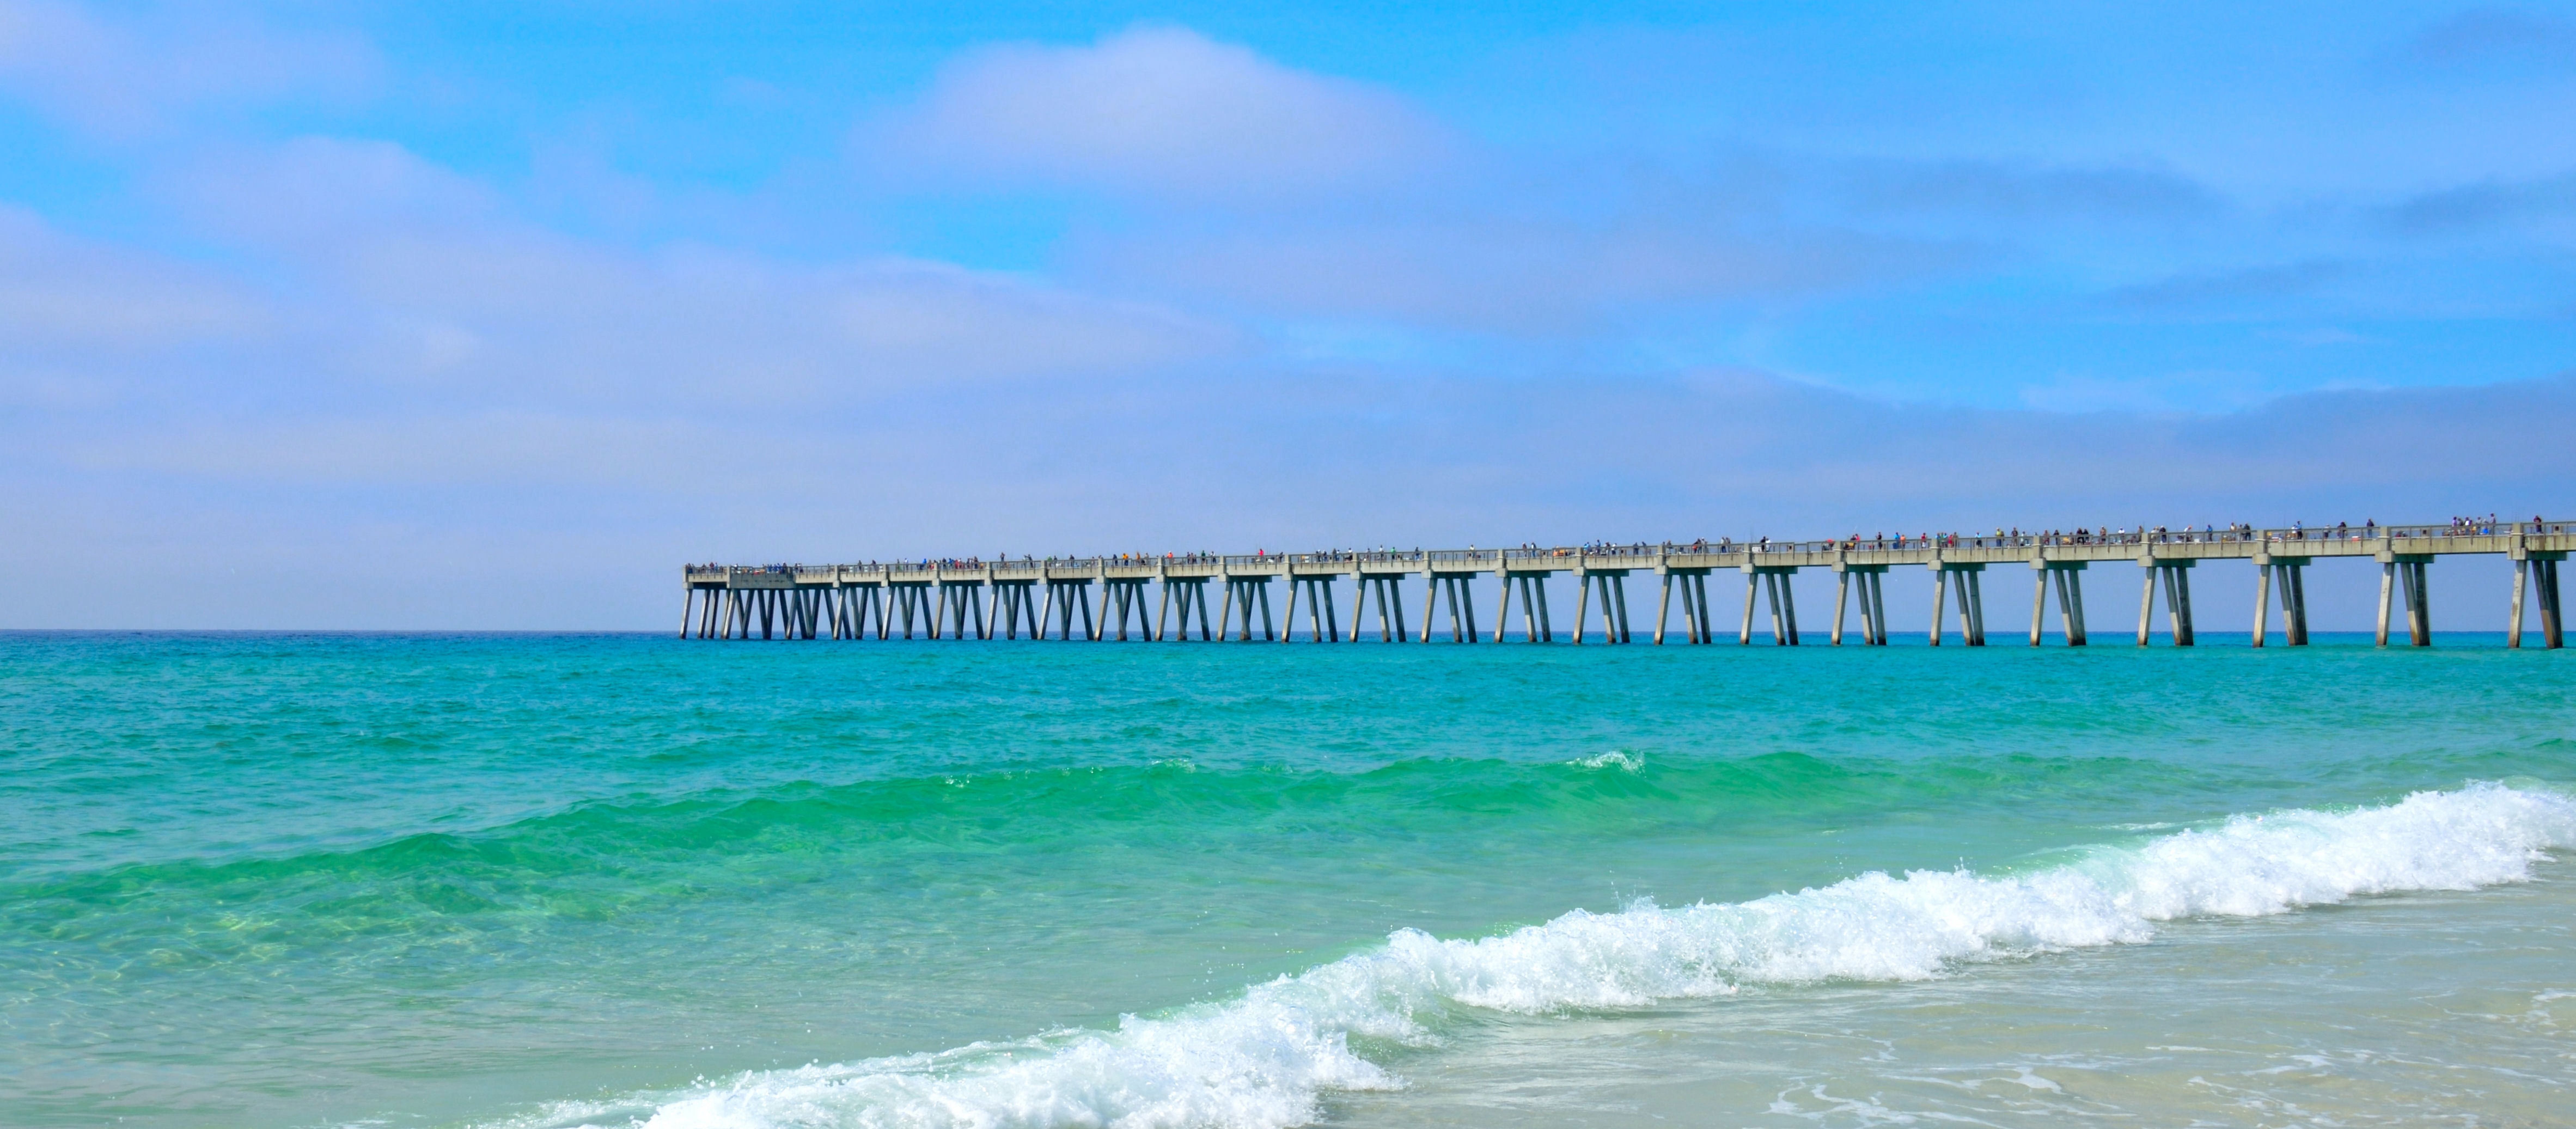 Pier extending out over the blue green ocean at Panama City